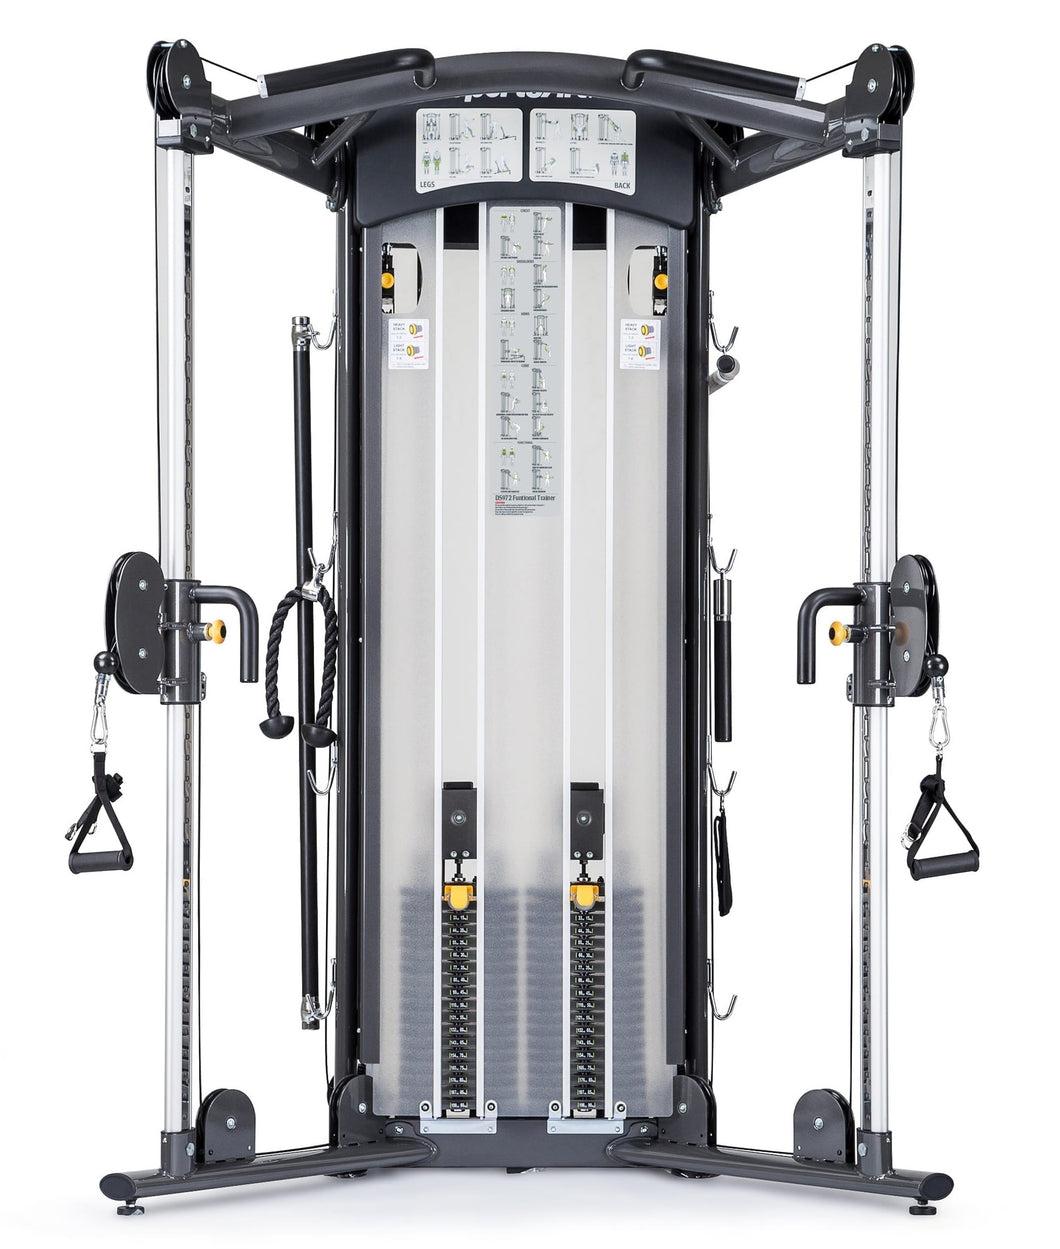 SportsArt DS972 Dual Stack Commercial/Rehab Functional Trainer